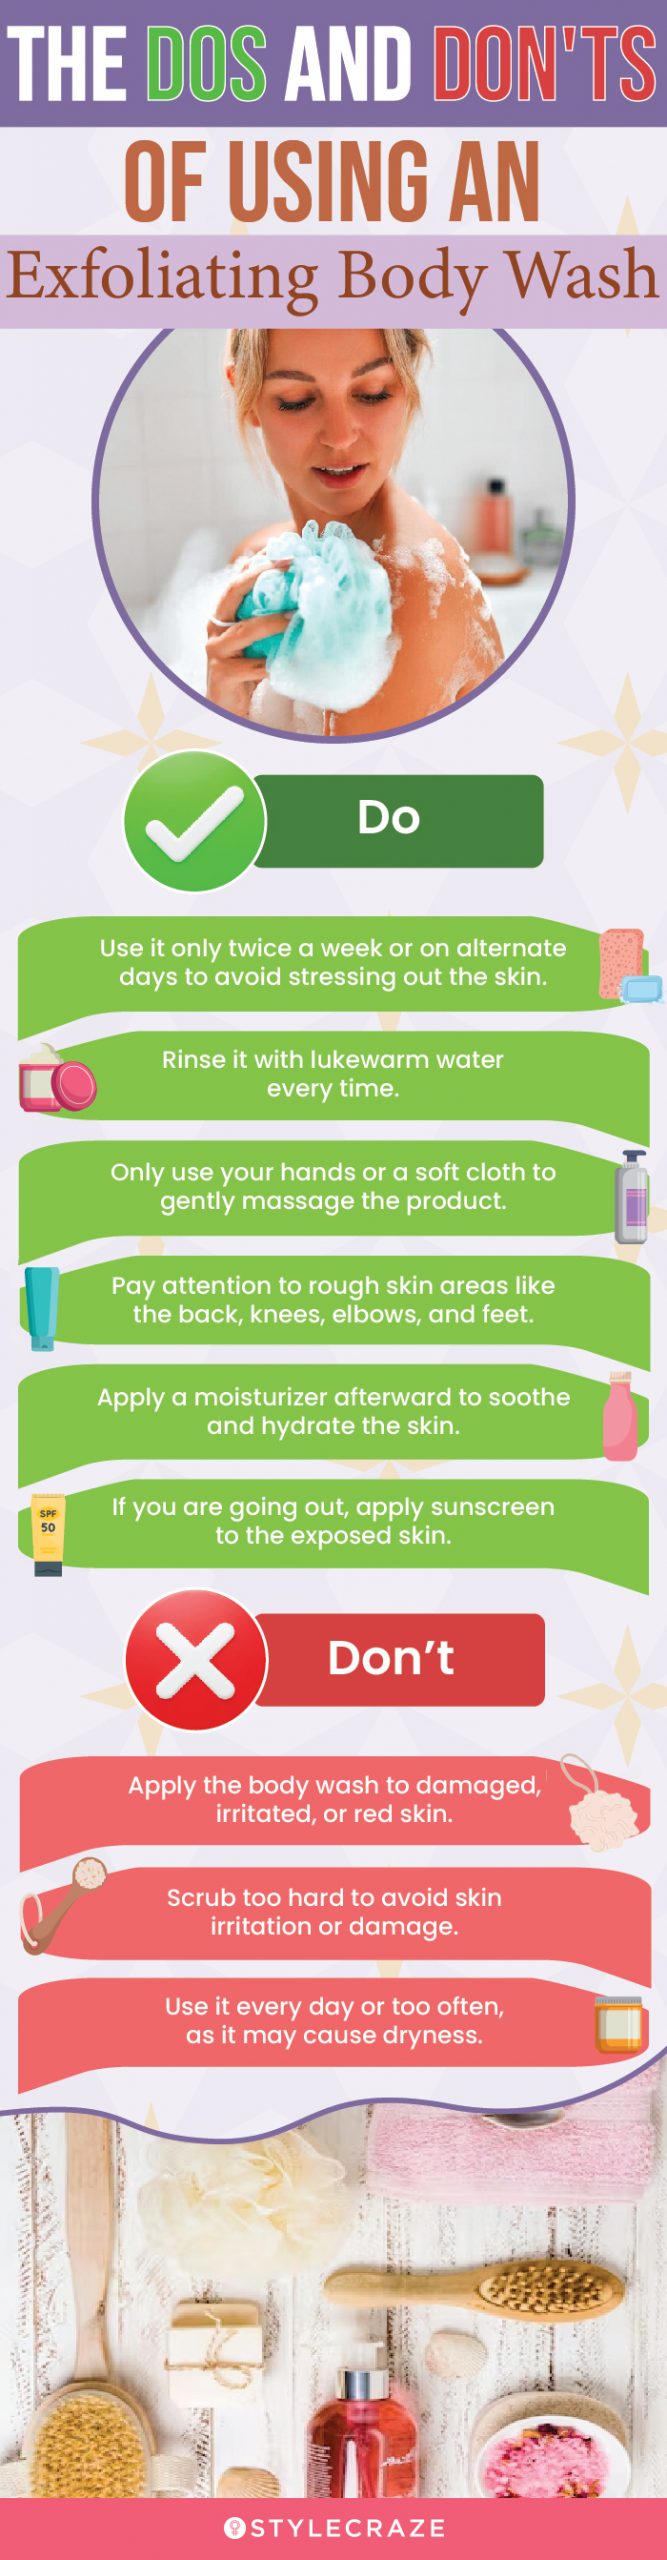 Do's And Don'ts Of Using An Exfoliating Body Wash (infographic)